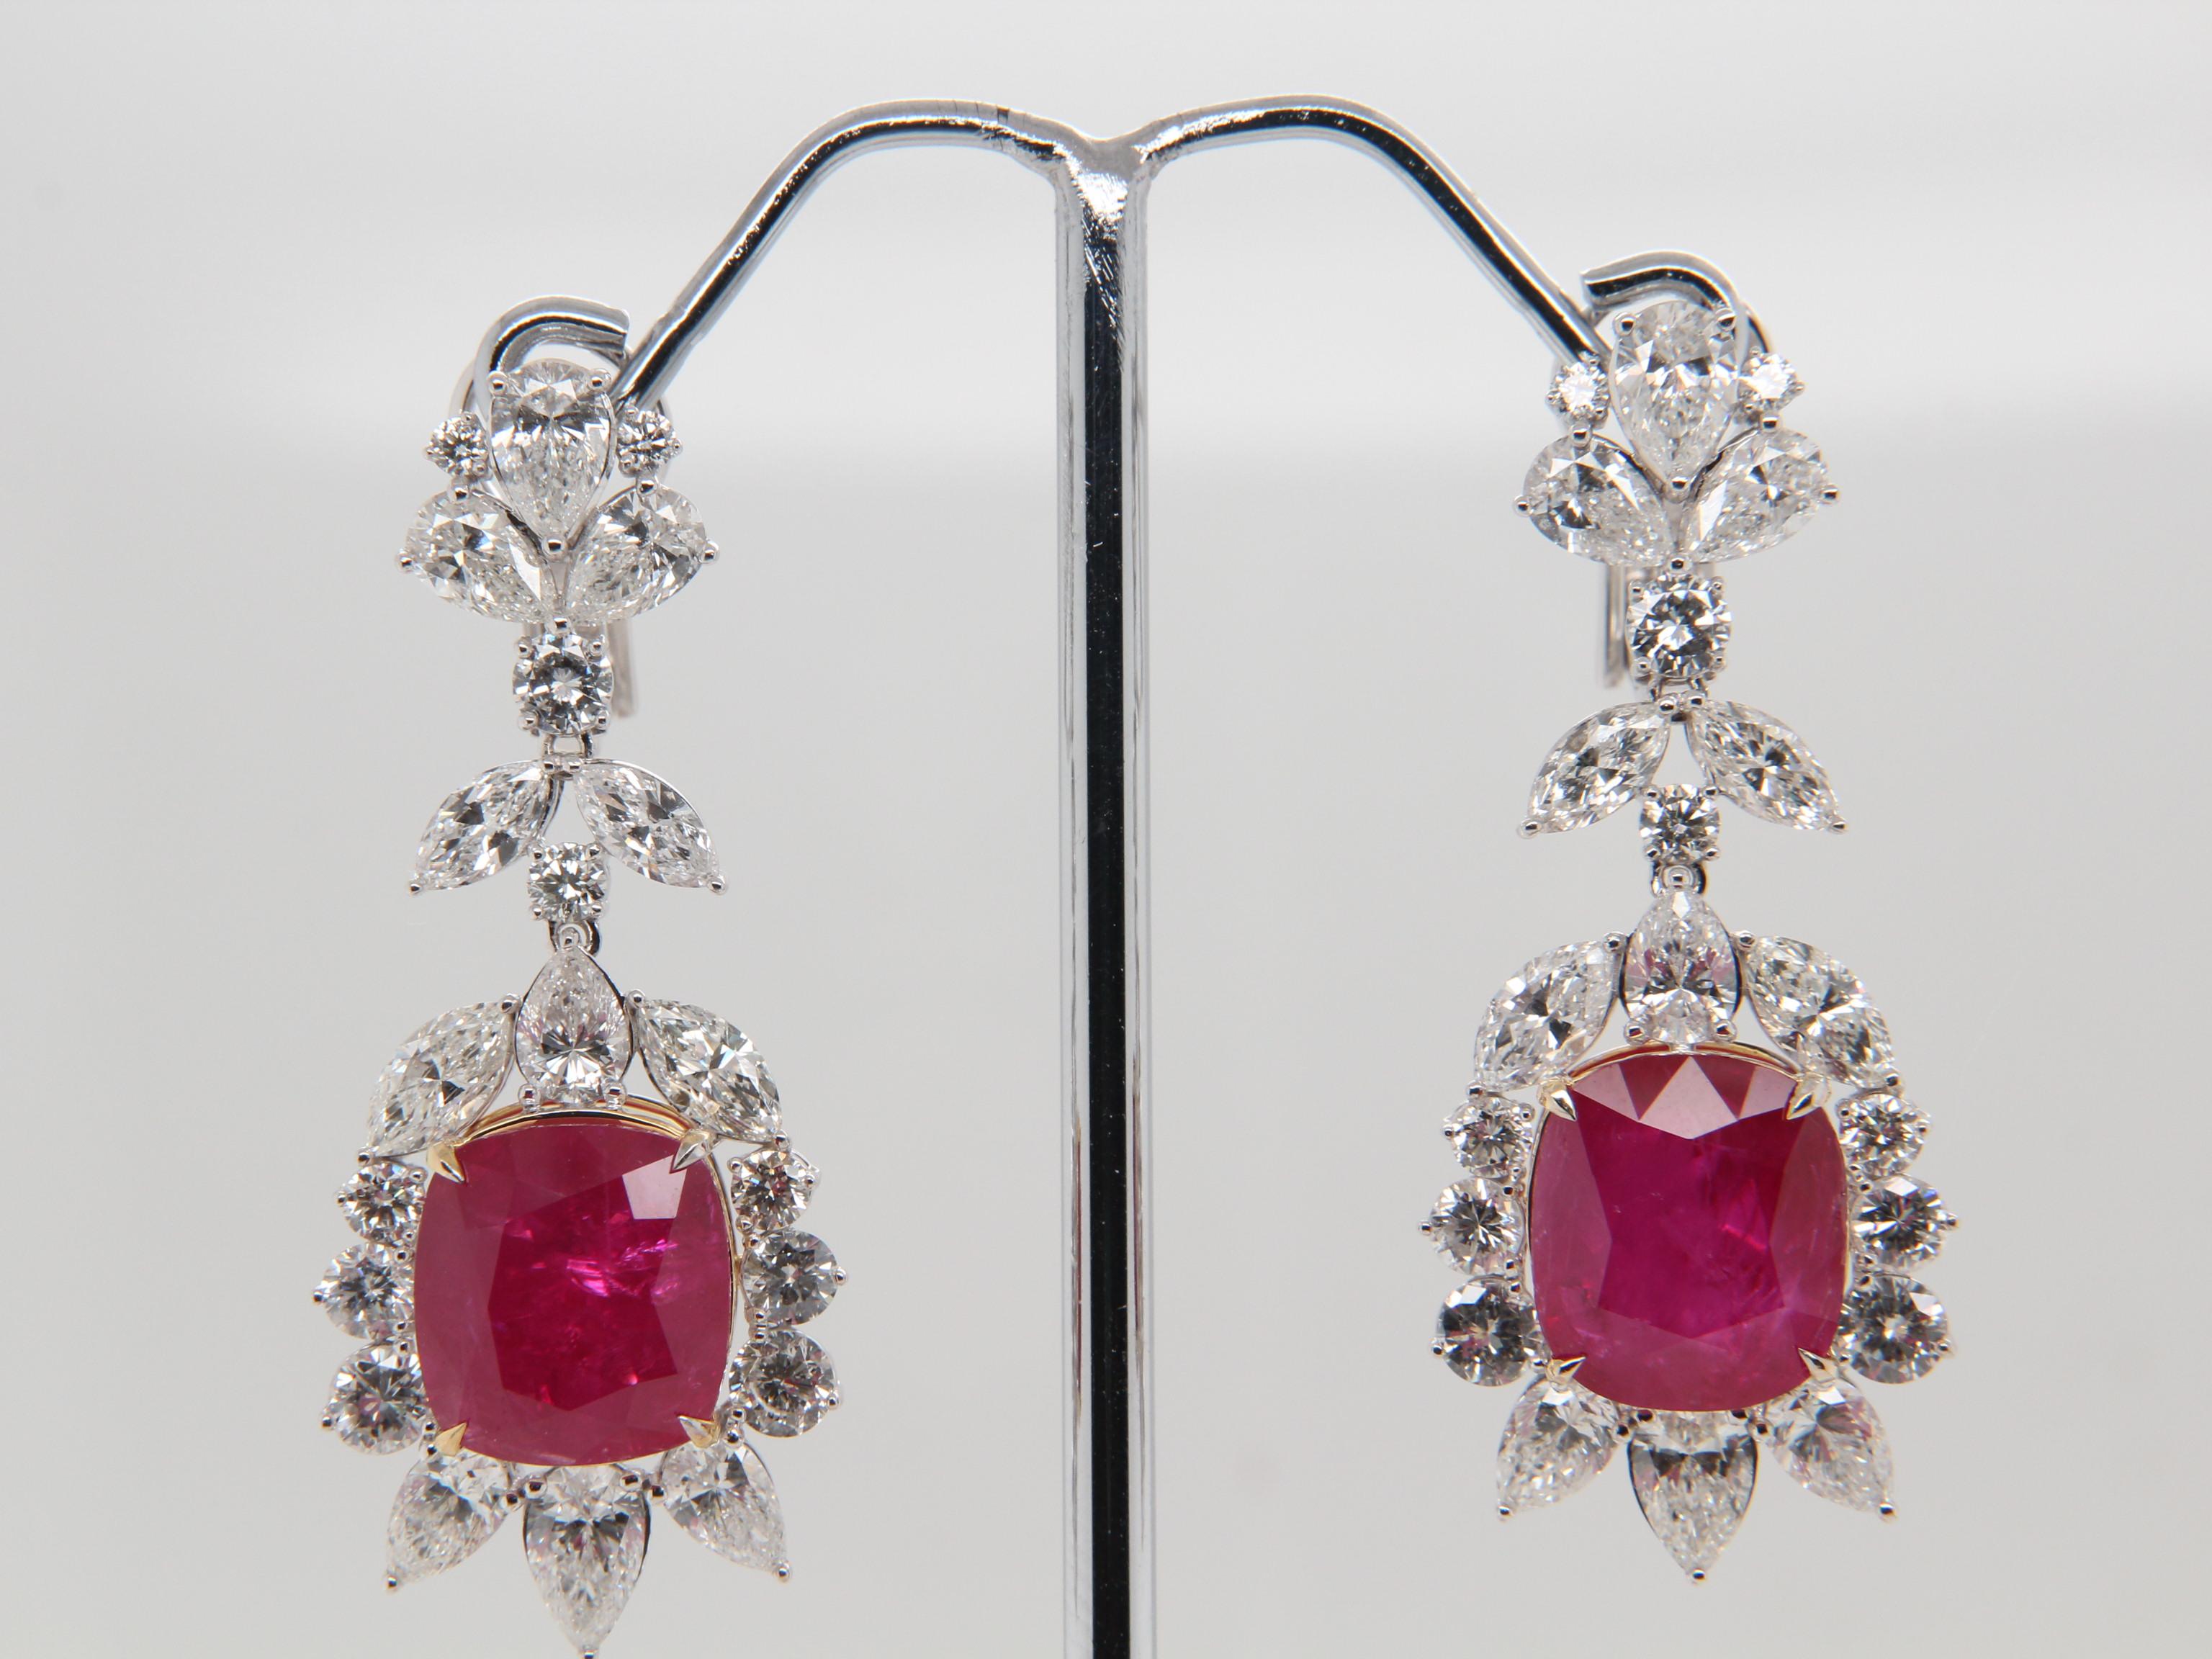 A brand new handcrafted ruby earring by Rewa Jewels. The earring’s center stones weigh 13.55ct and 1.32ct, are of Burmese origin and certified by Gubelin Gem Lab as natural, unheated, 'Red' with certificate number 21091144. The centre rubies have